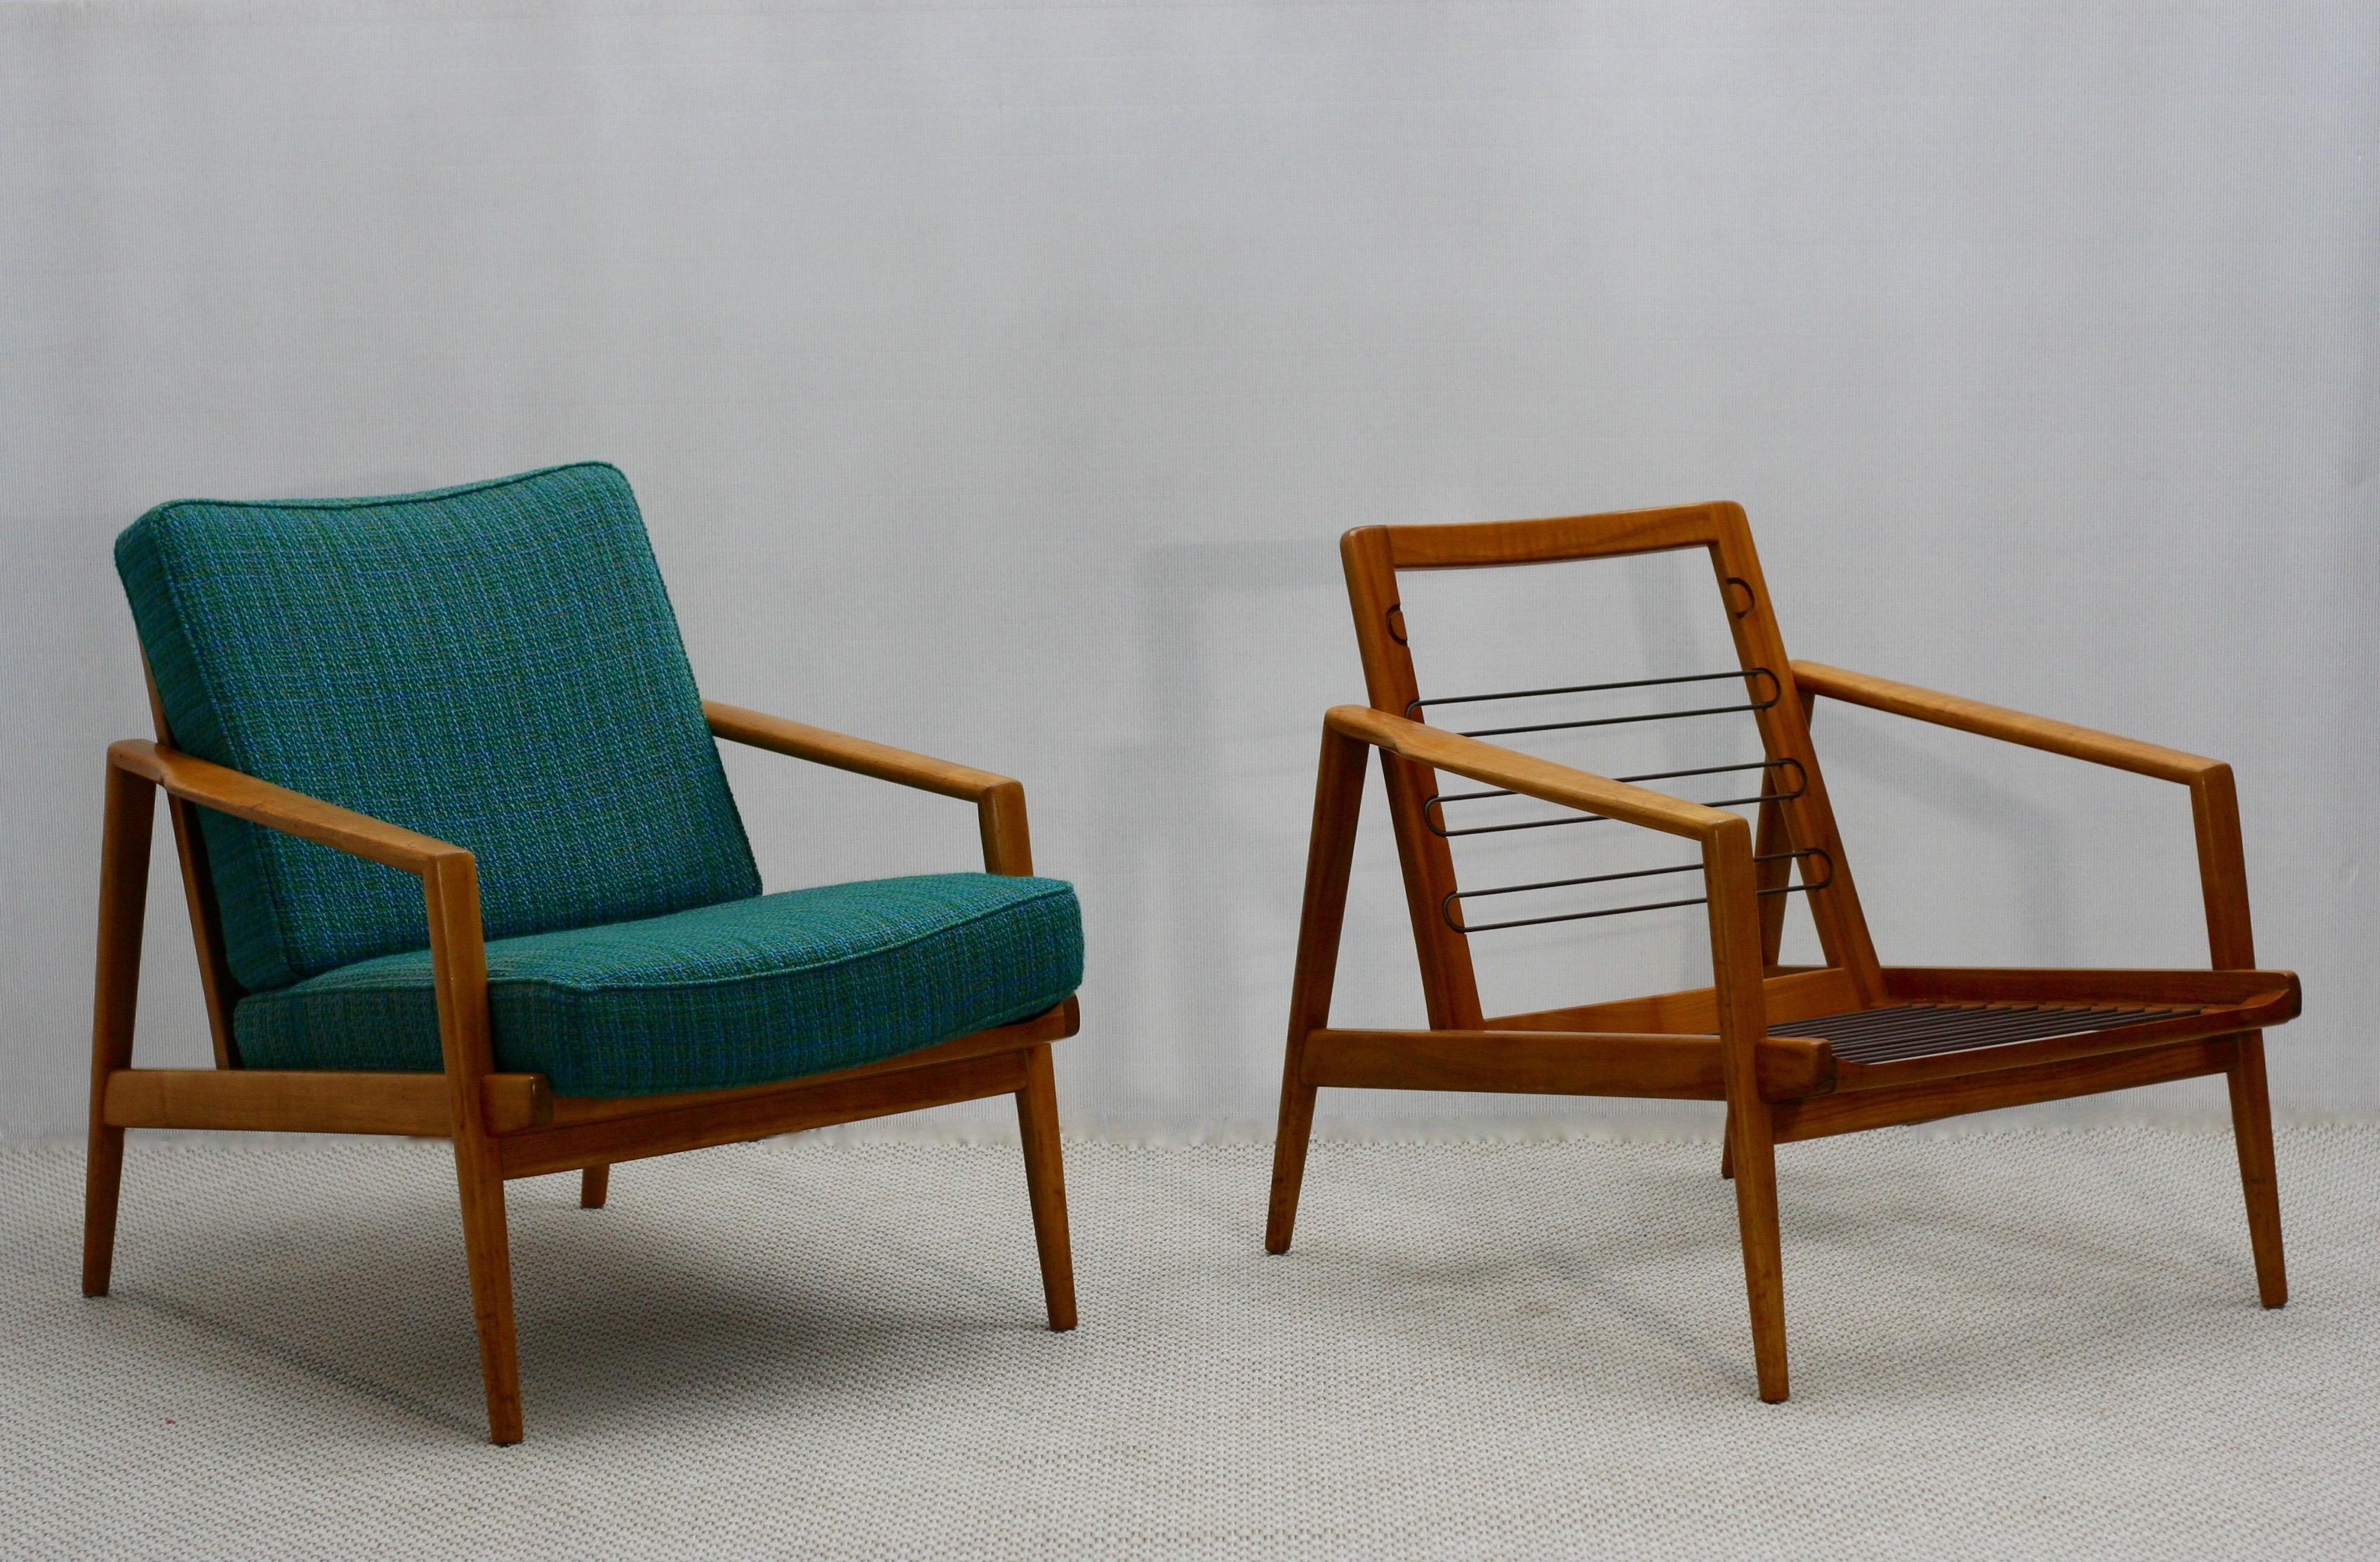 Set of Two Midcentury German Beech Wood Lounge Chairs from Knoll Antimott In Good Condition For Sale In Riga, Latvia